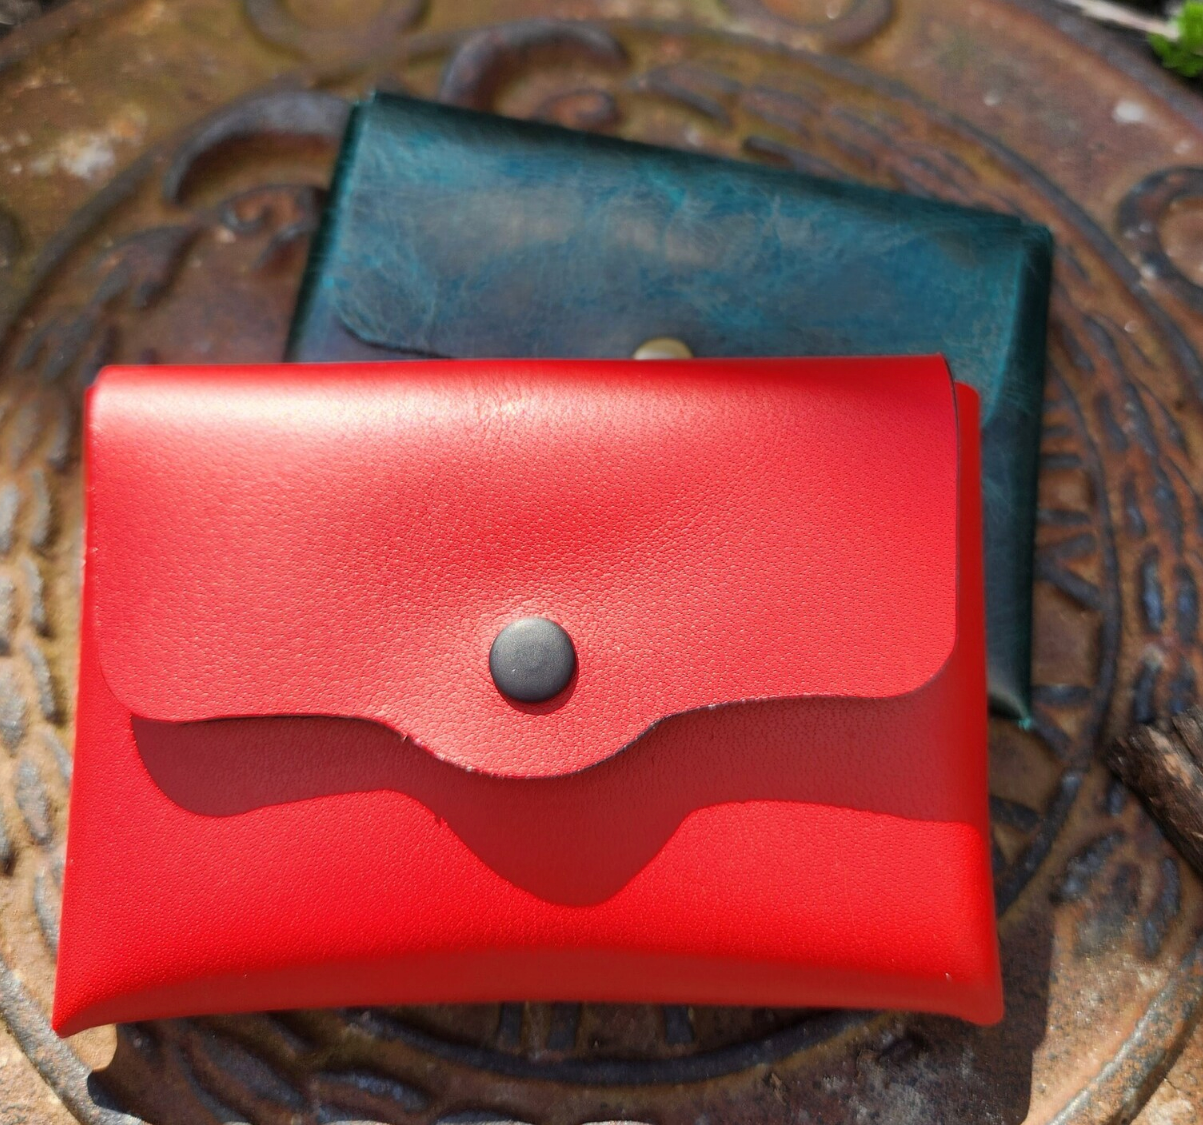 Leather clutch wallet - handcrafted leather wallet - coin purse